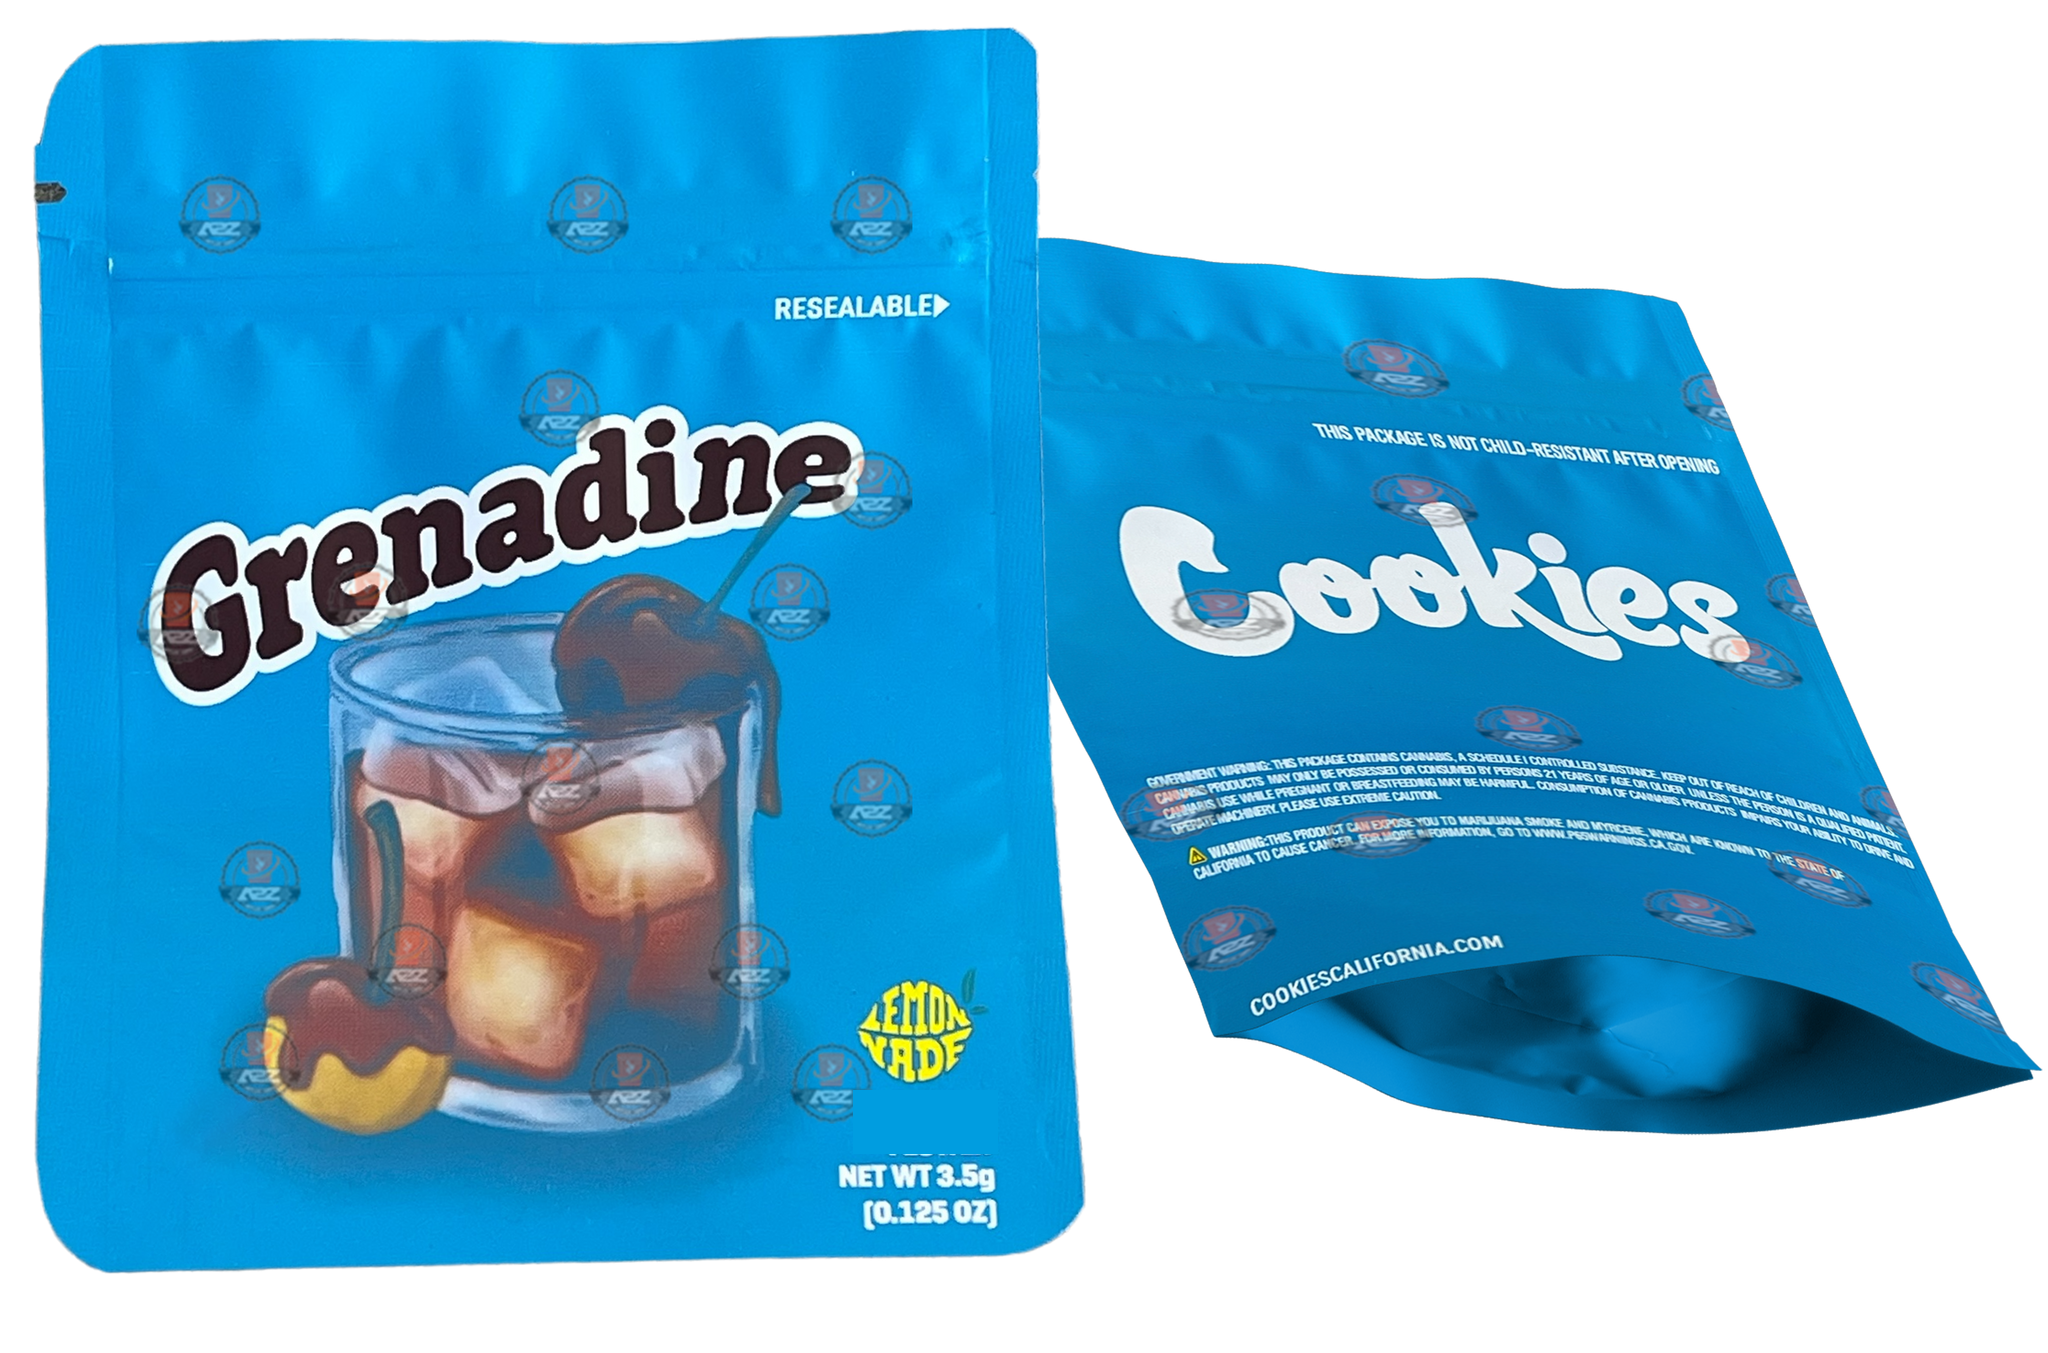 Cookies Grenadine Mylar Bags 3.5 Grams Smell Proof Resealable Bags w/ Holographic Authenticity Stickers and Label